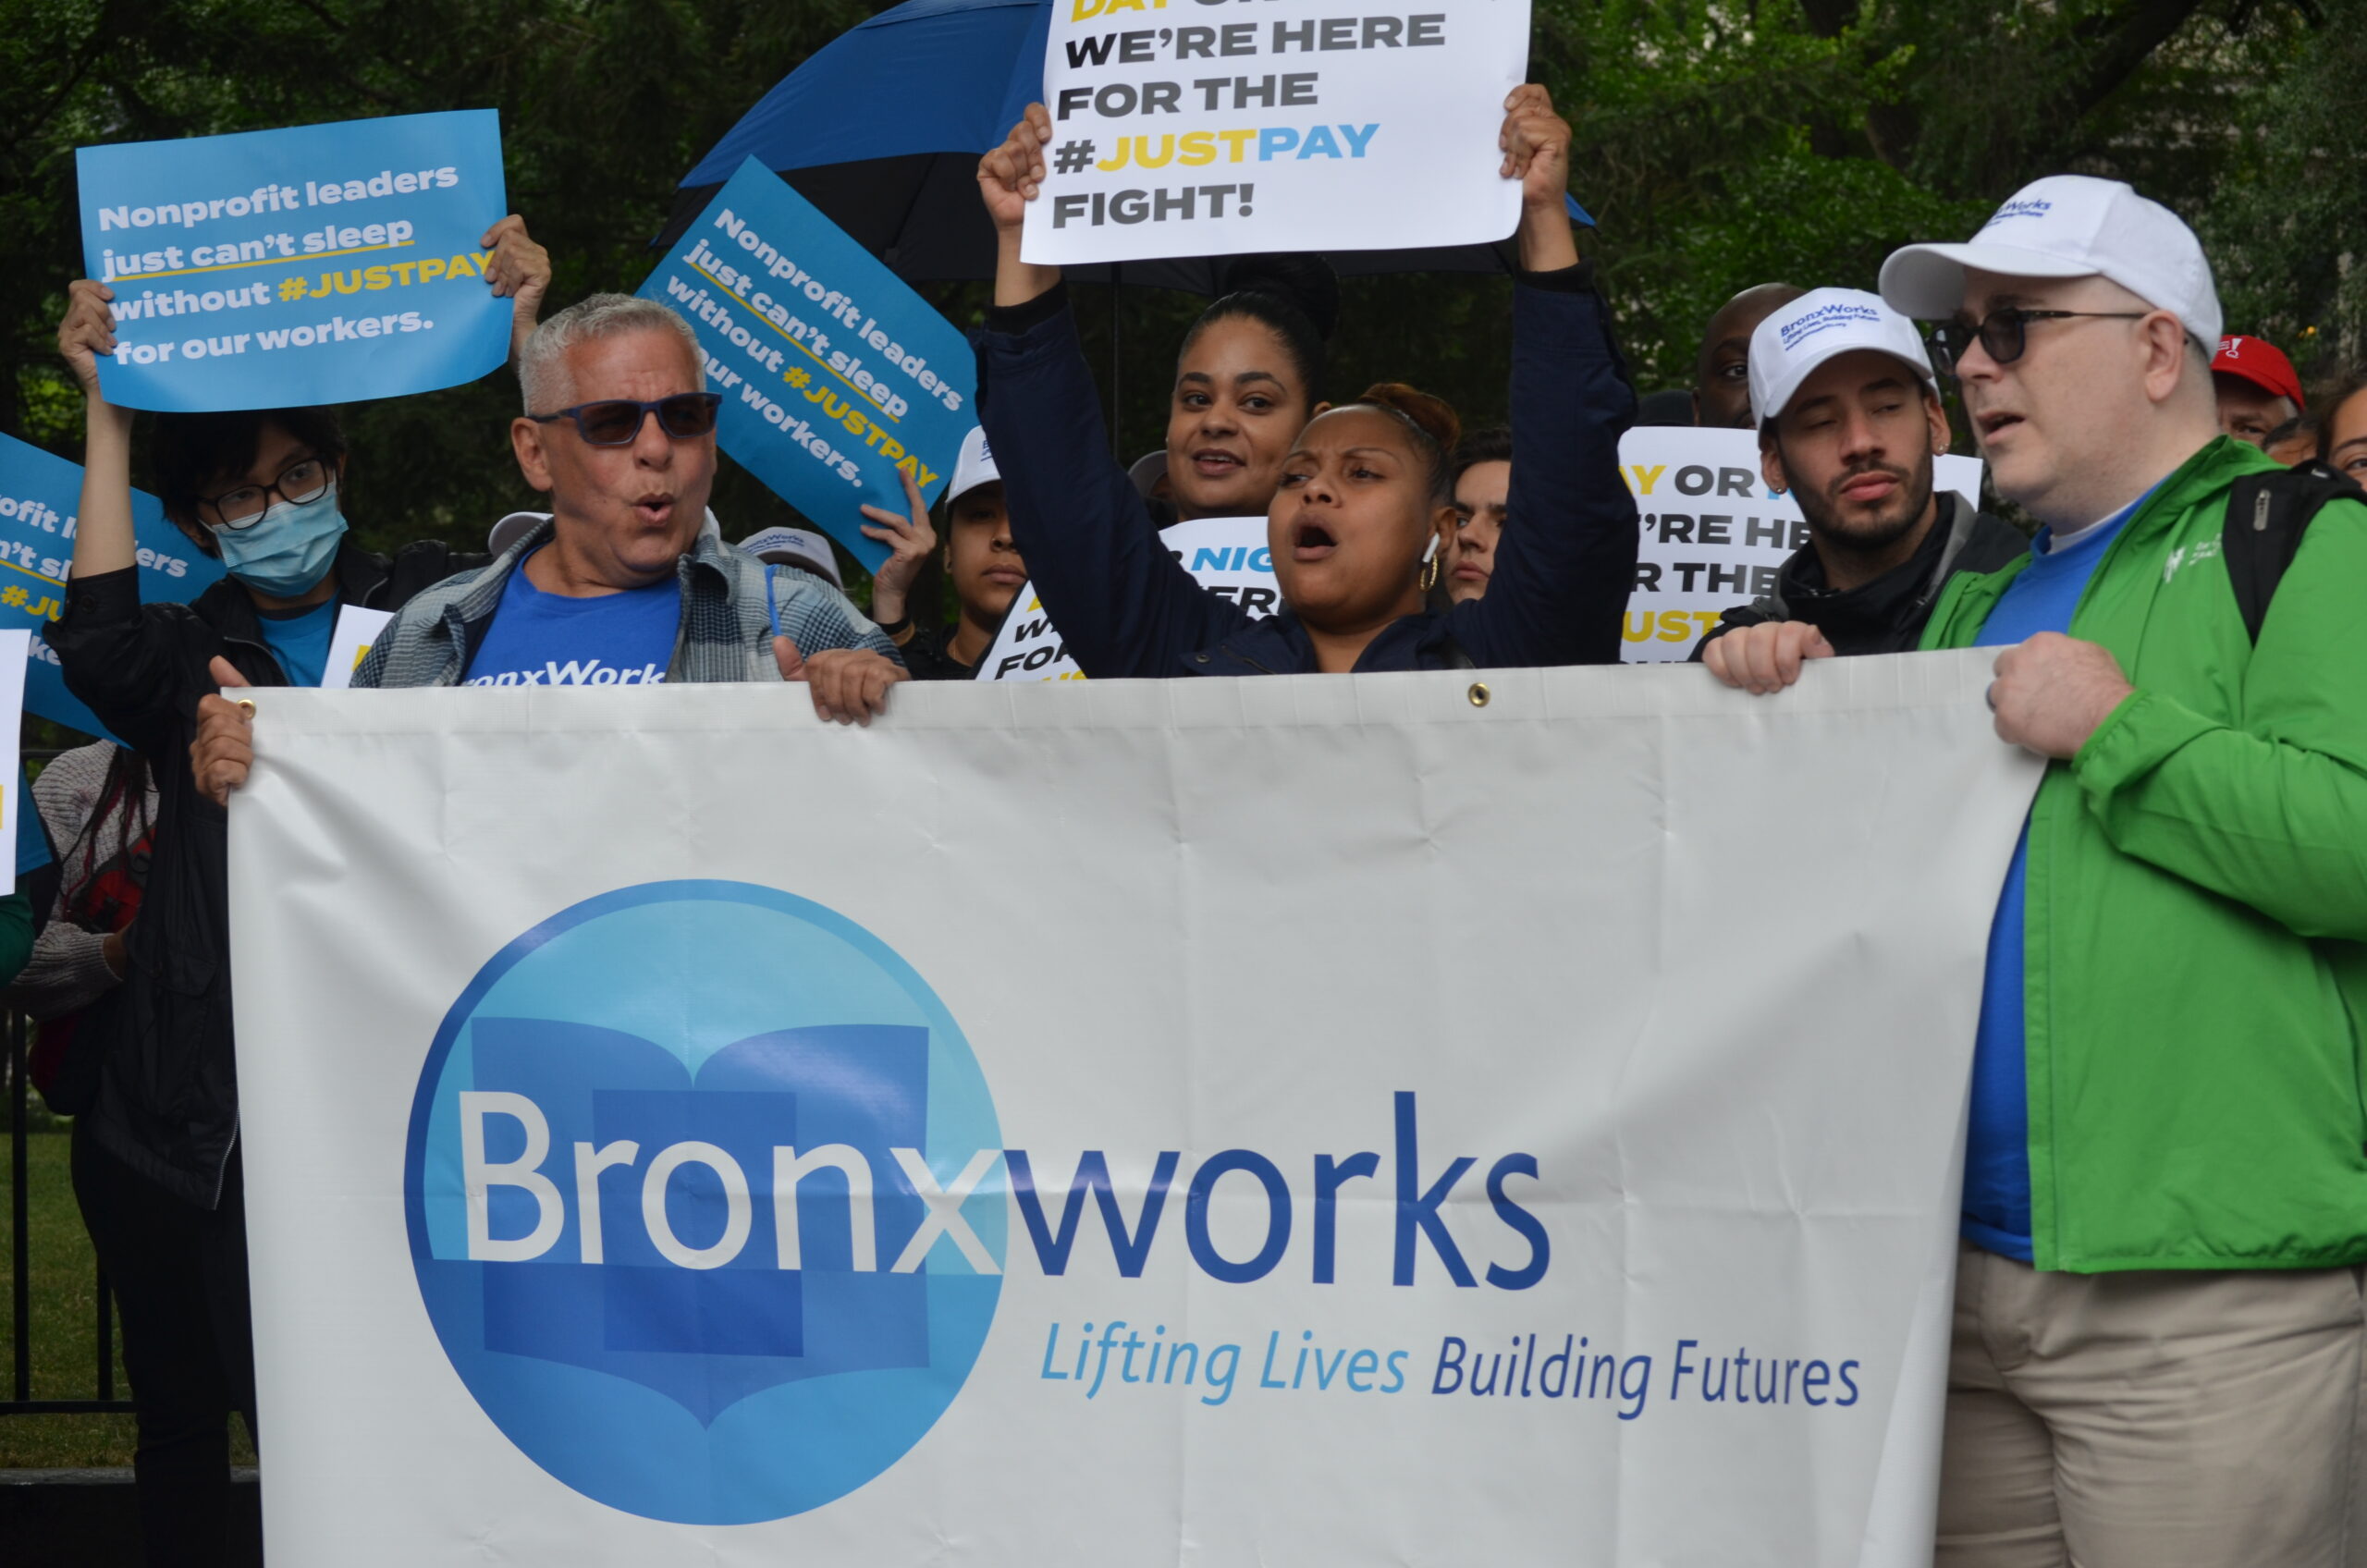 Multiple people rallying holding signs. There is a large banner with the BronxWorks logo. One woman holds a sign that says "We're Here for the #JustPay Fight"